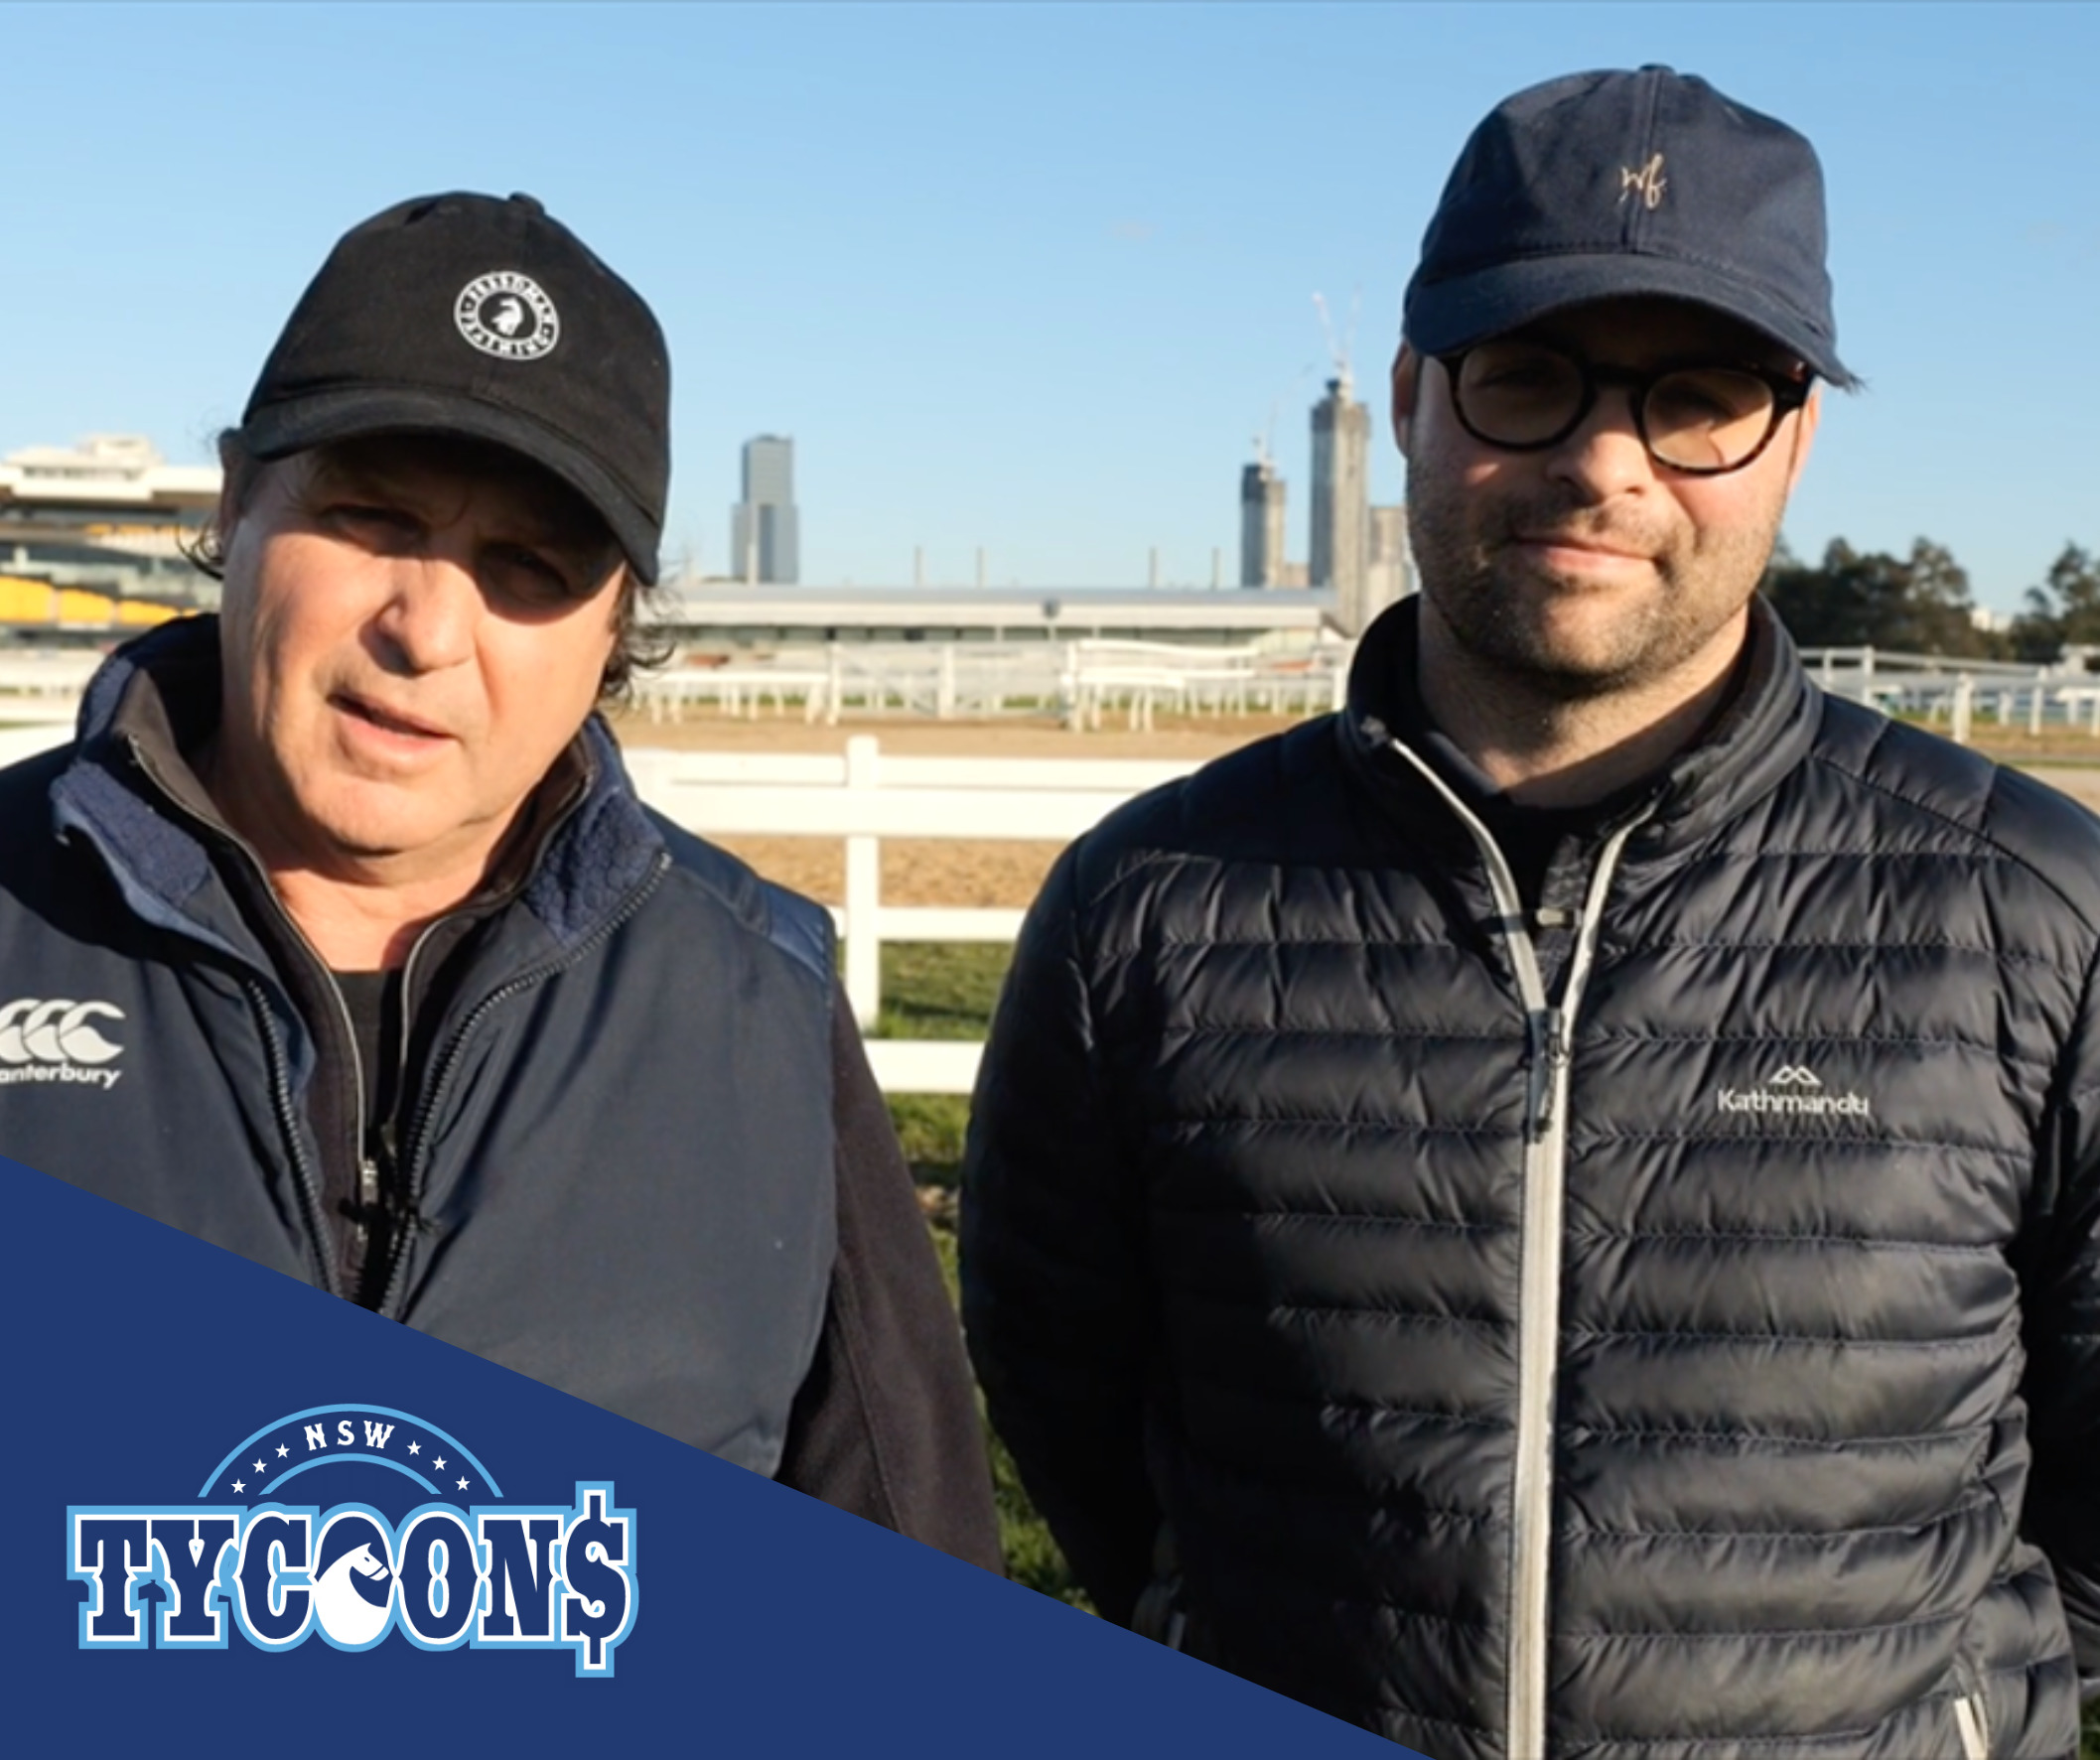 Richard & Will Freedman Racehorse trainers for the NSW Tycoons